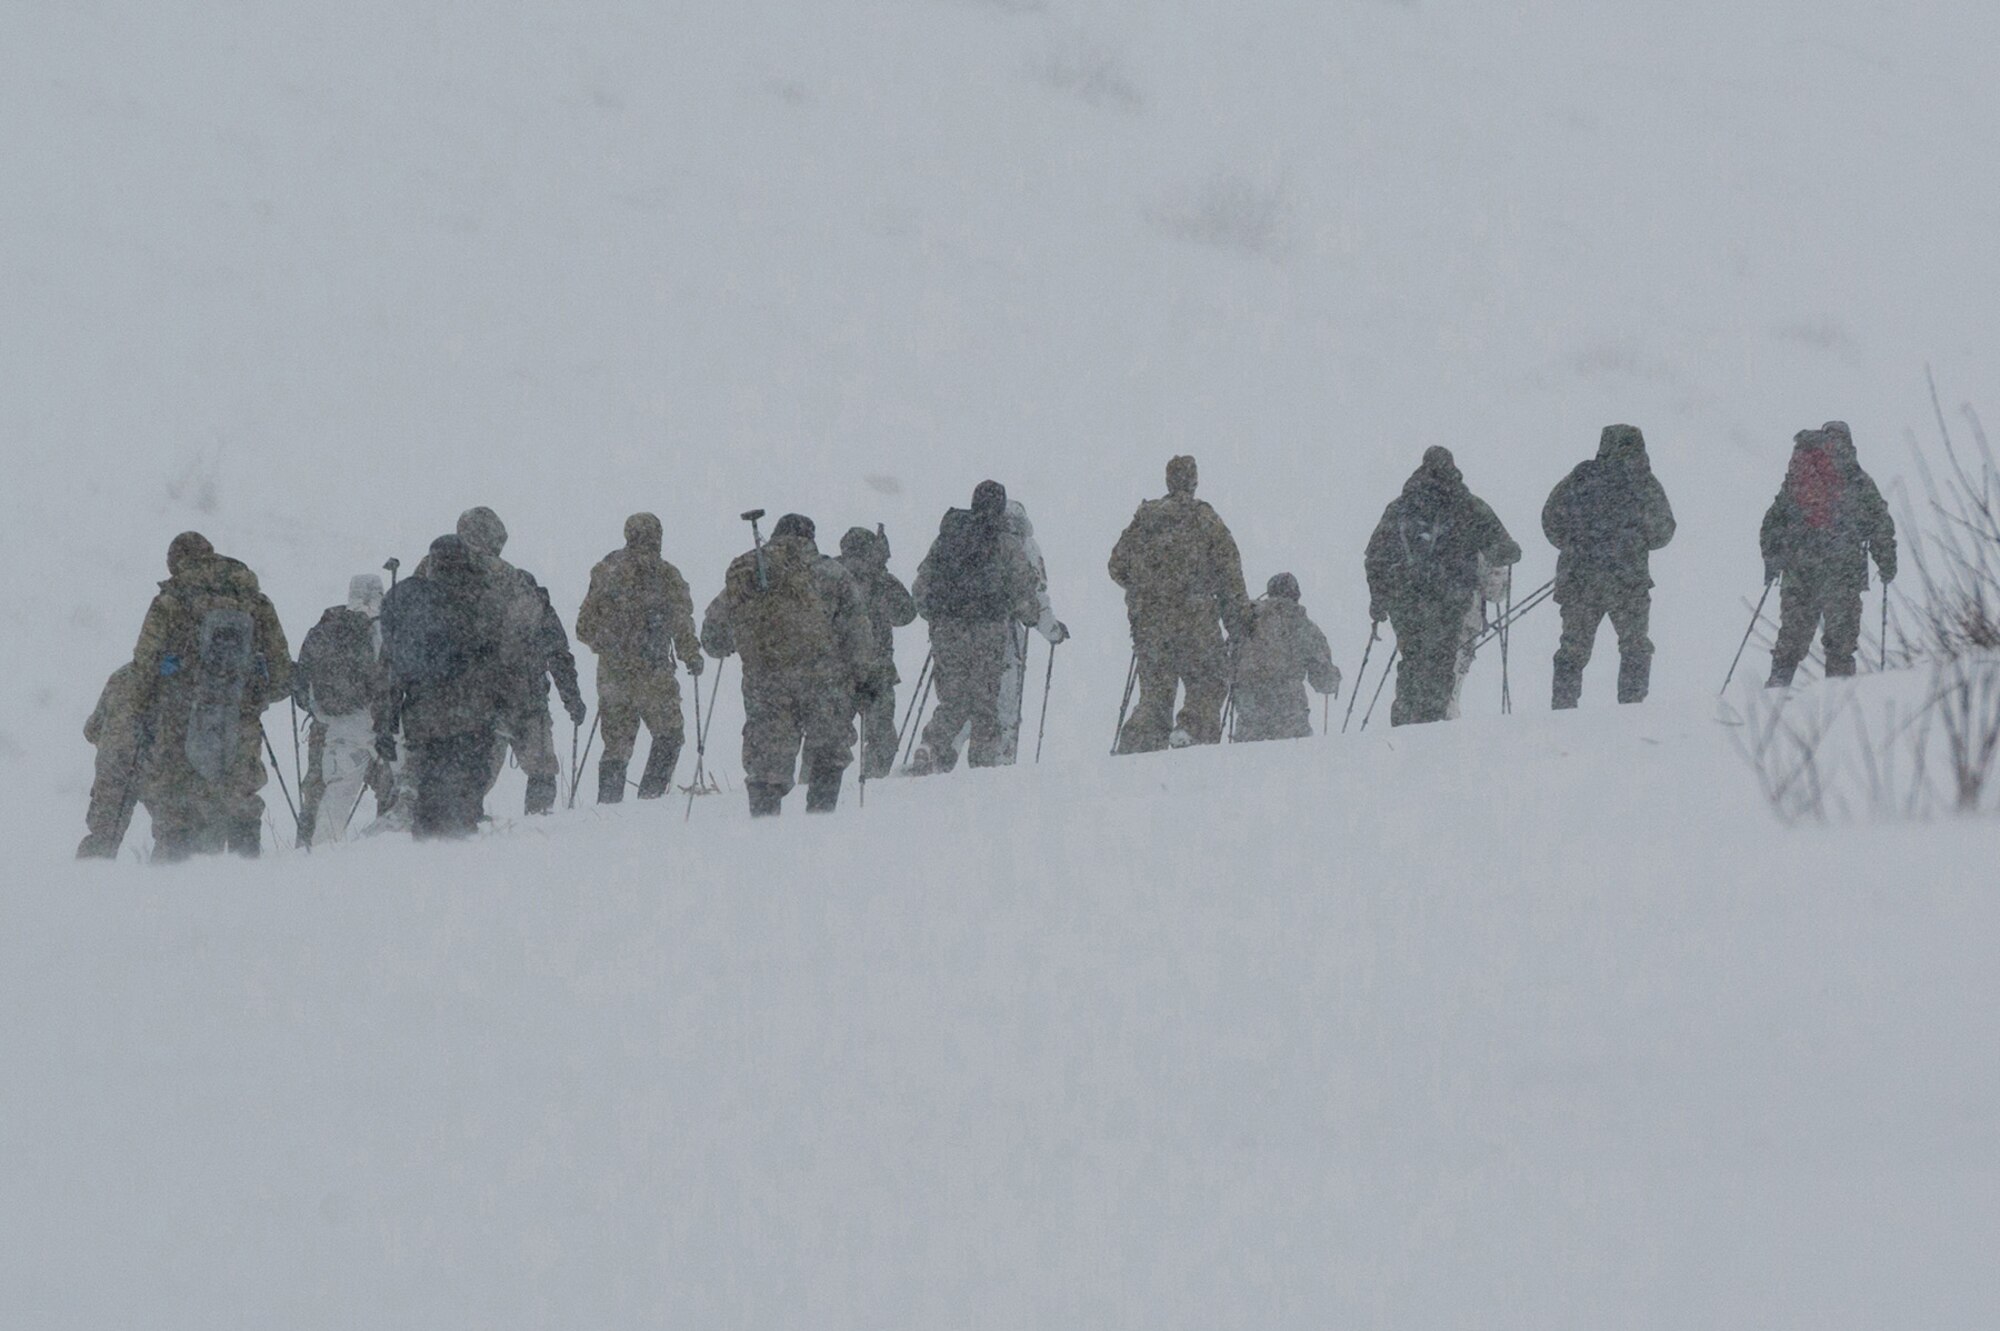 U.S., Allied, and partner-nation Soldiers from nine countries participate in the Cold Regions Military Collaborative Training Event at Arctic Valley in Joint Base Elmendorf-Richardson, Alaska, Feb. 22, 2018. The U.S. Army Alaska hosted event focused on strengthening relationships among allied and partner nations with experience operating in cold weather, and at high elevations; and set conditions for future collaboration.